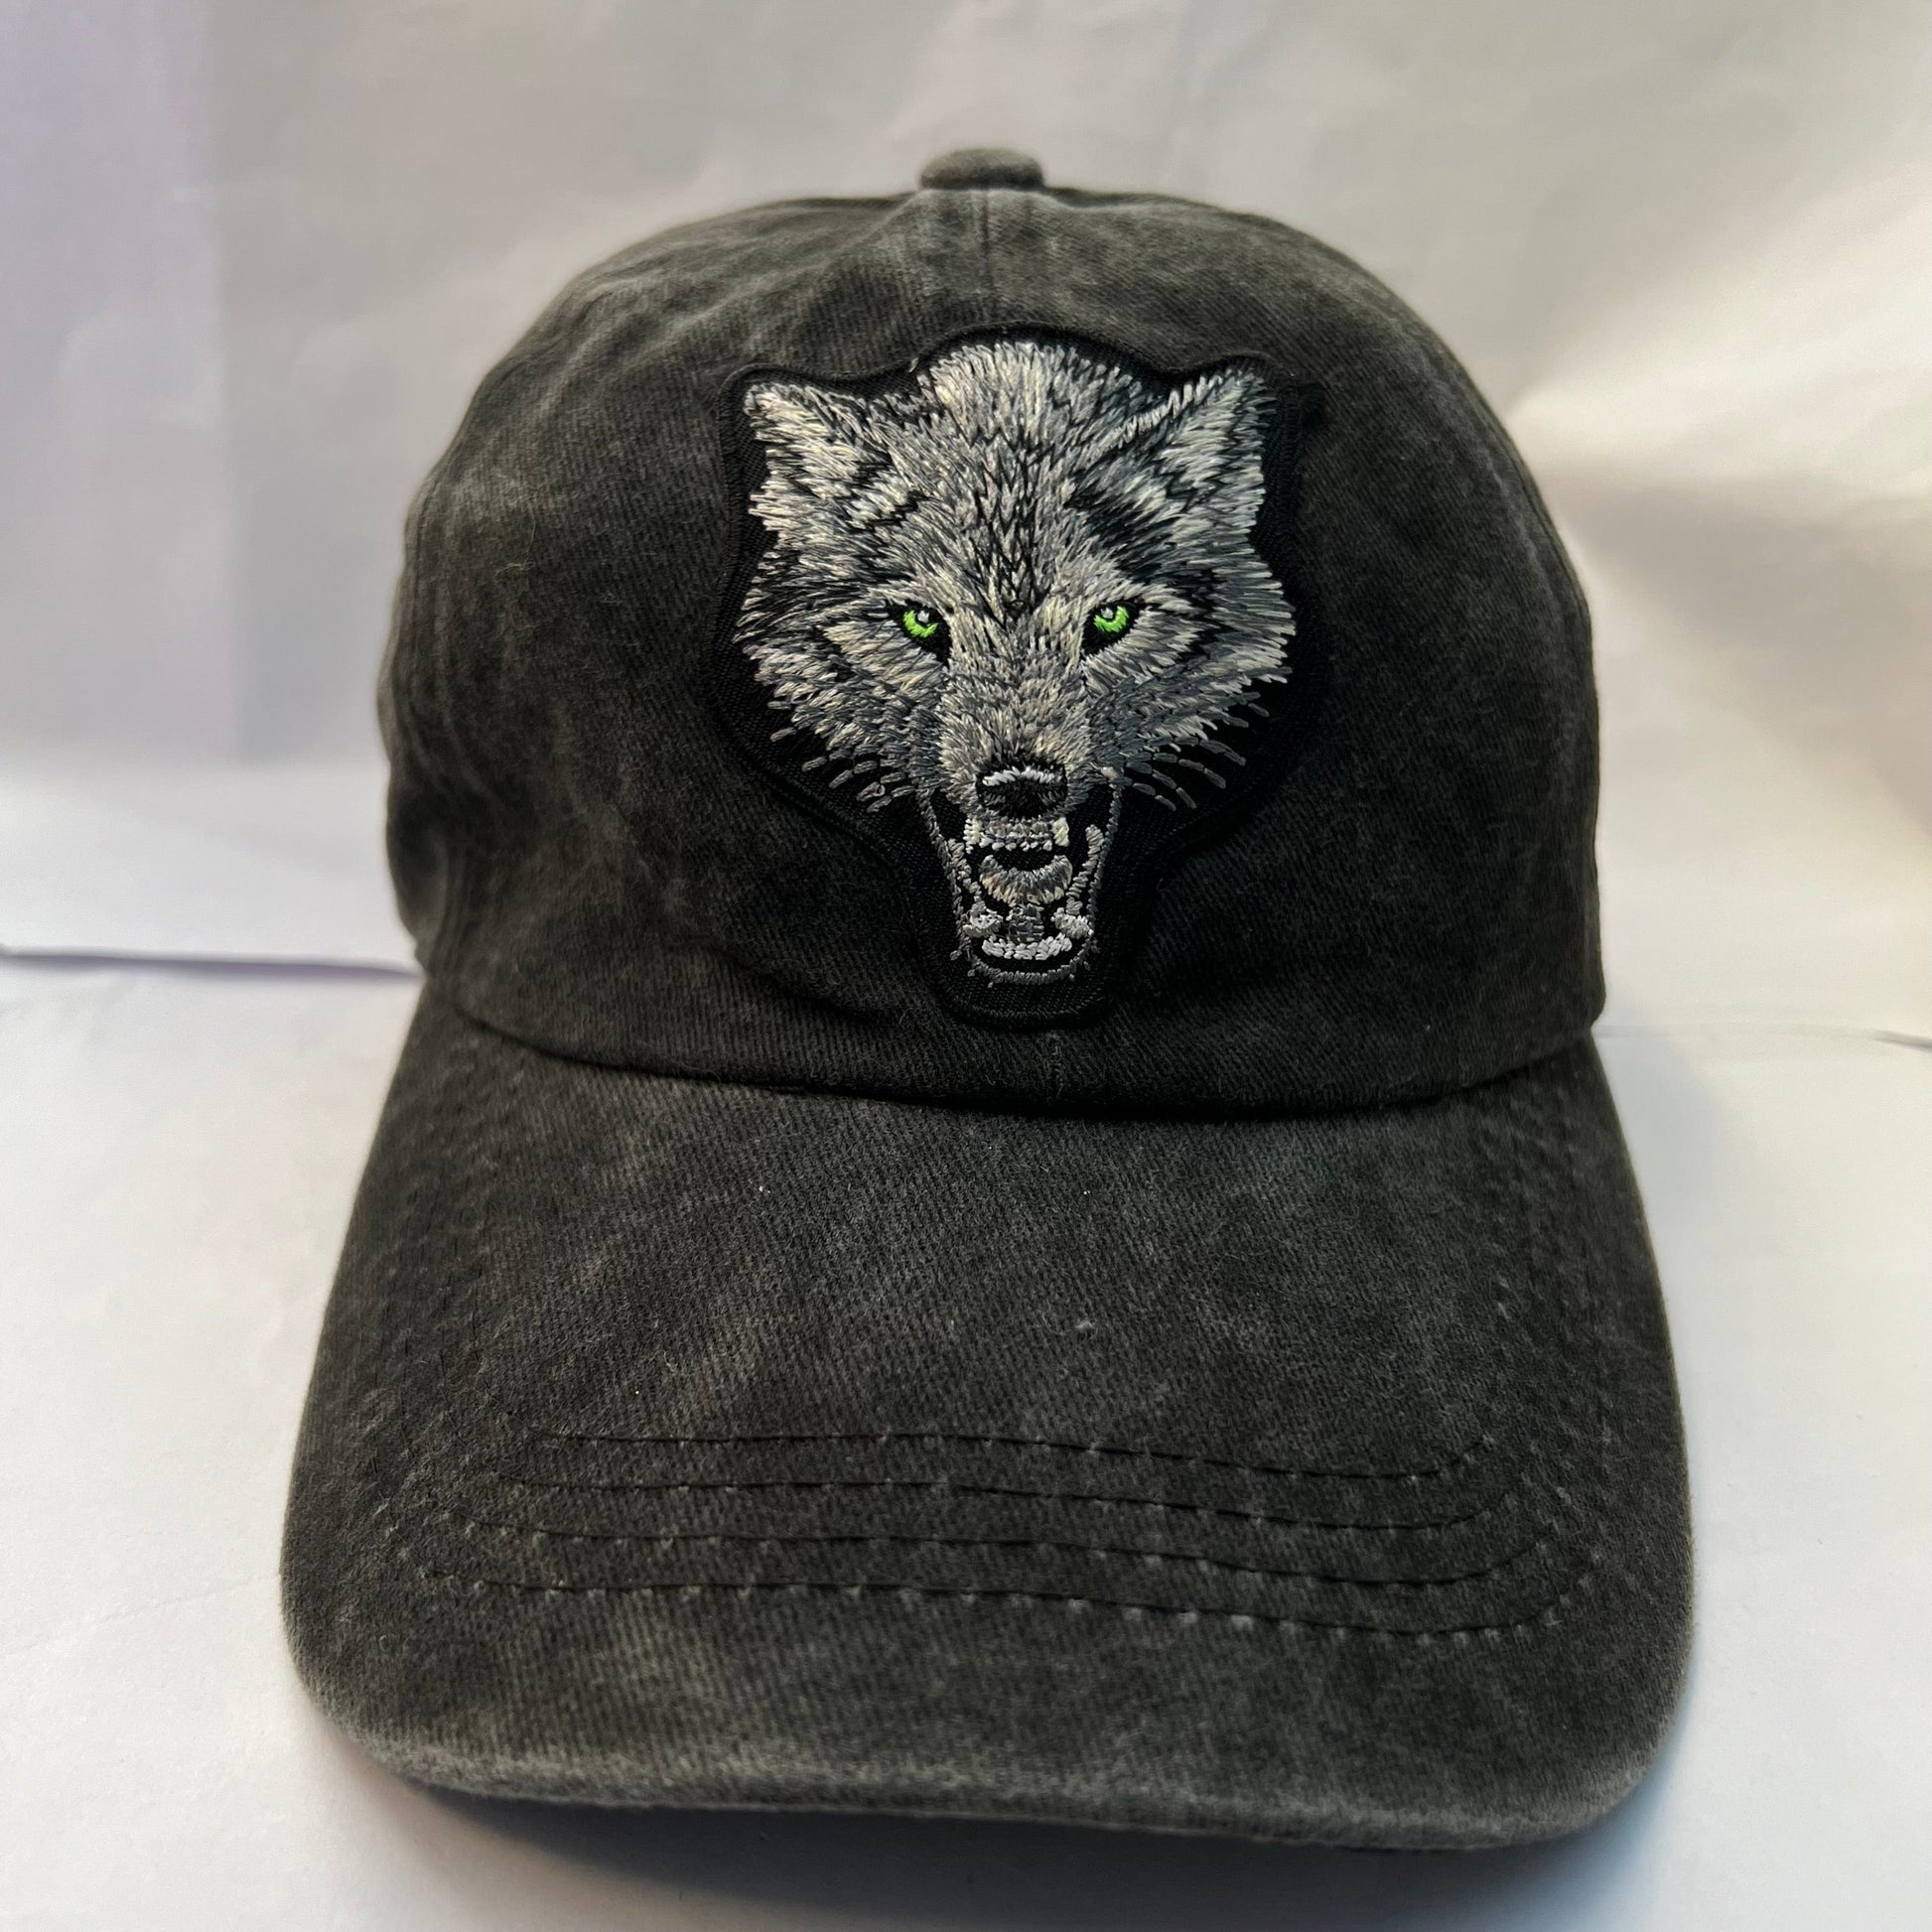 Black Baseball Hat Grey Wolf Embroidered Patch on Cap one size